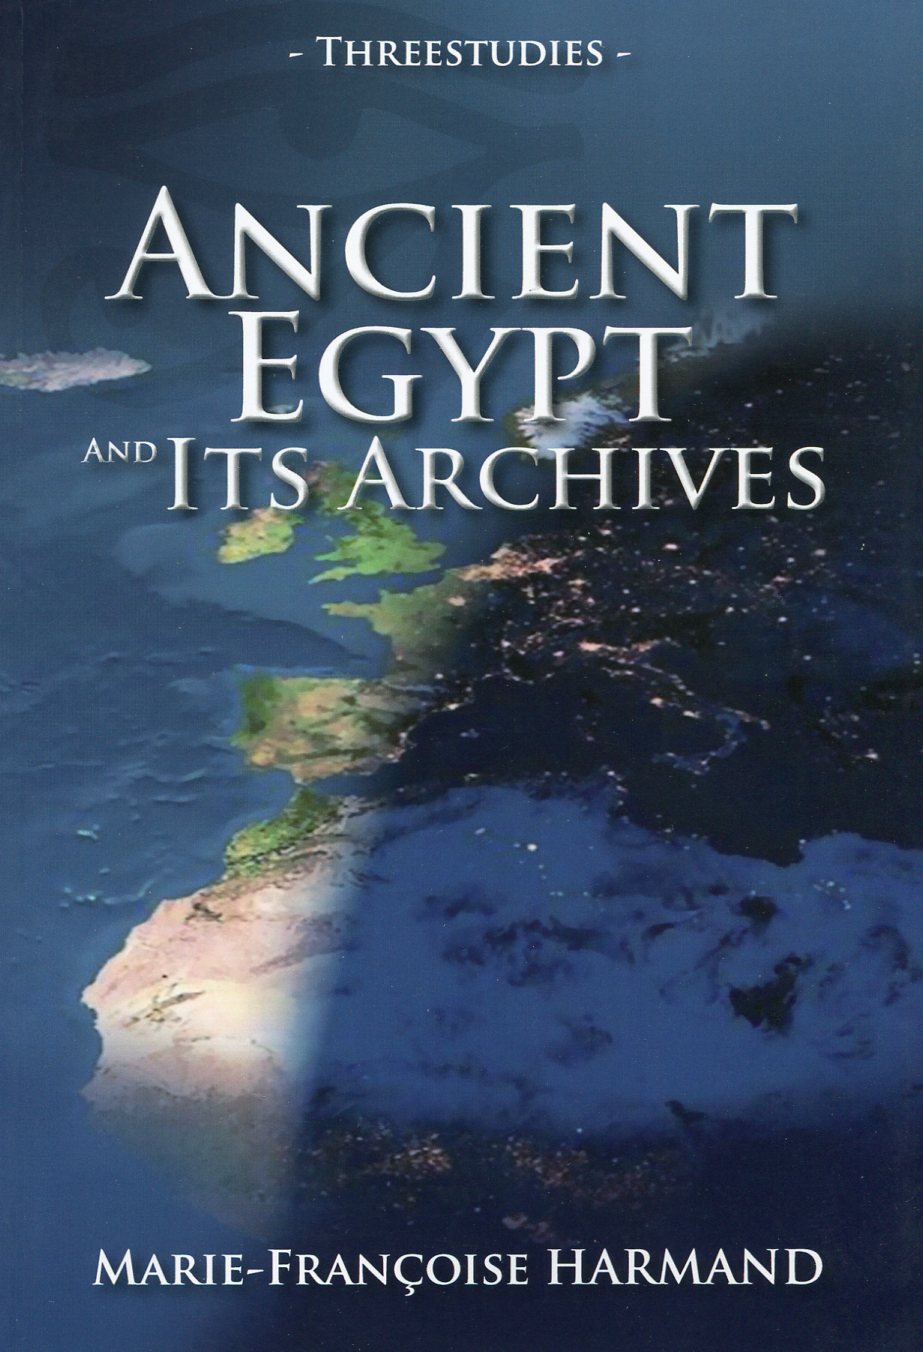 Ancient Egypt and its archives, 2011, 60 p.